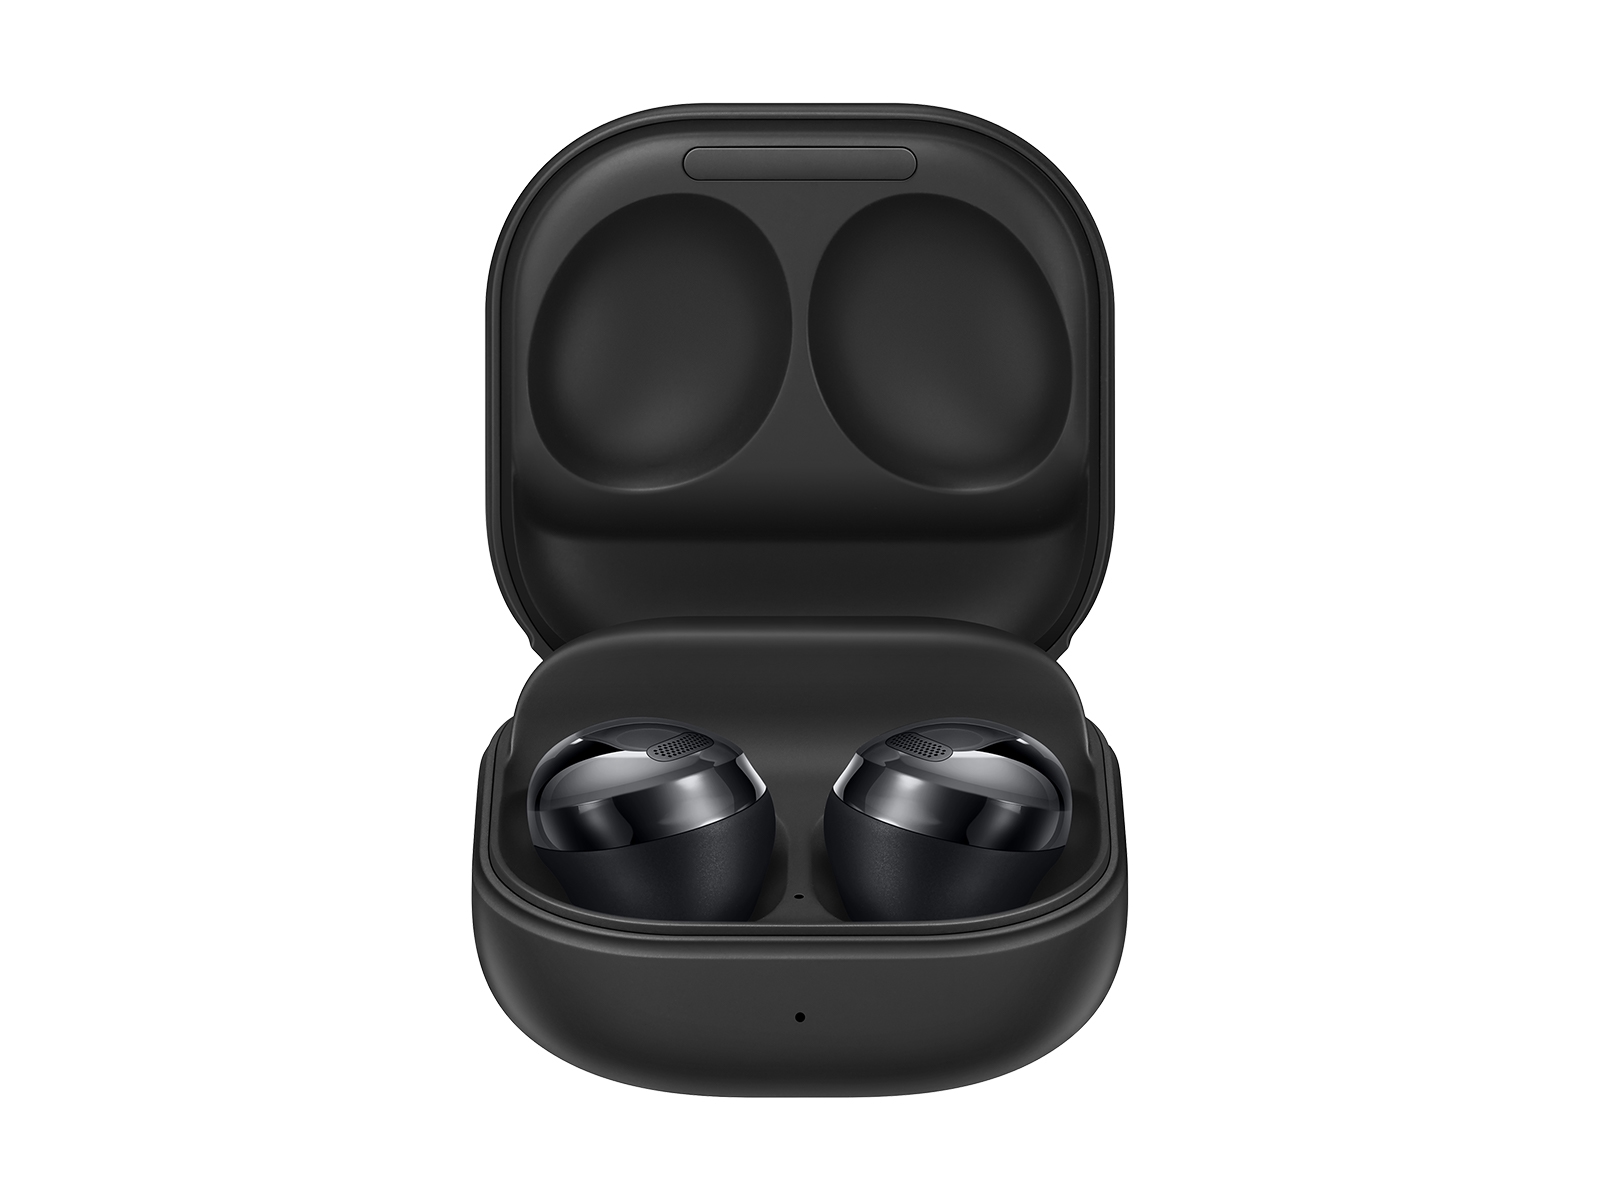 Retro Galaxy Buds Pro cases pop-up, but you can't get one - PhoneArena